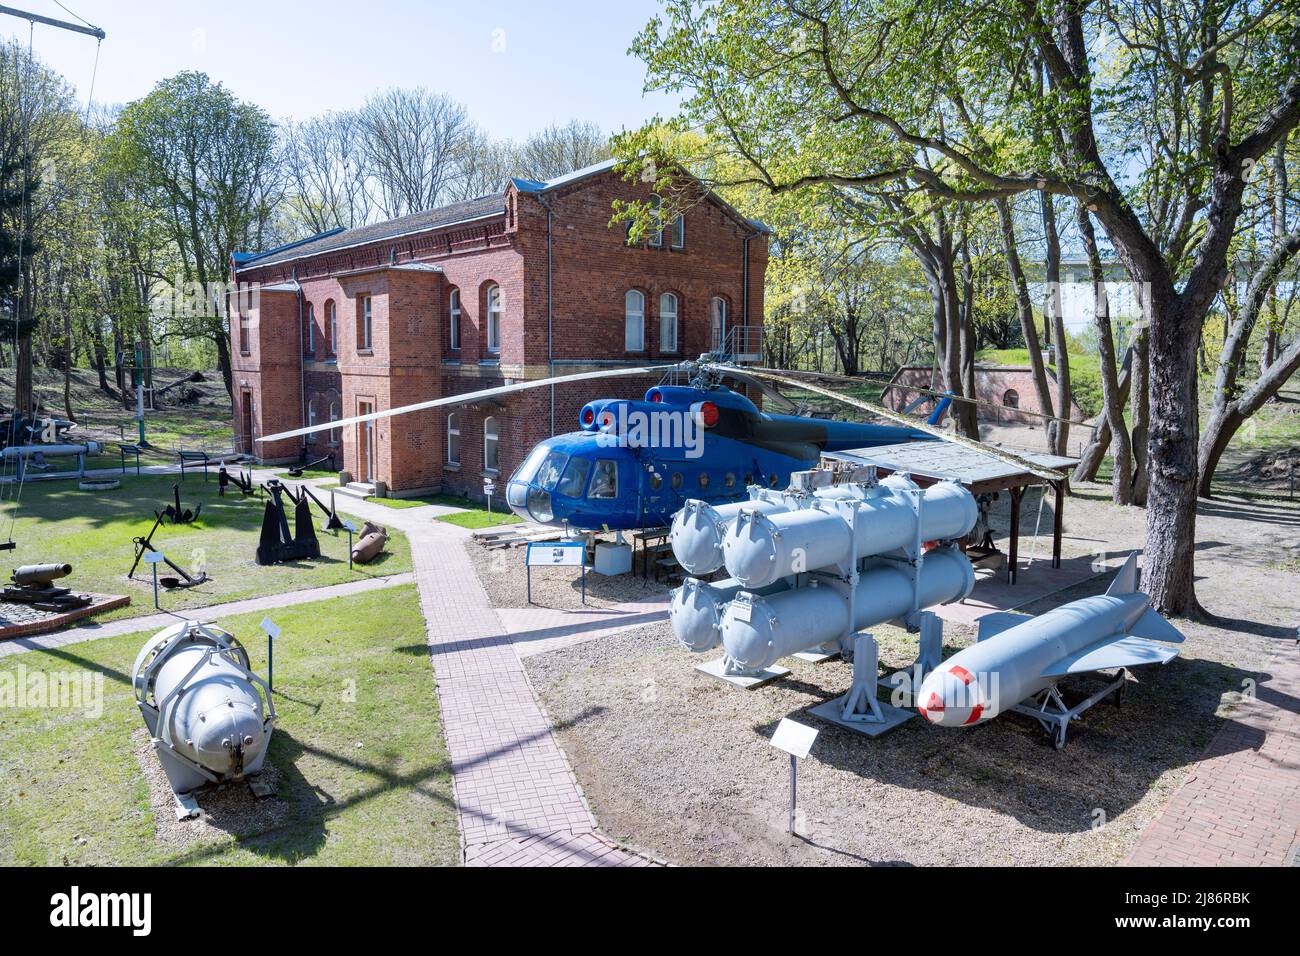 25 April 2022, Mecklenburg-Western Pomerania, Stralsund: A Mil Mi-8 helicopter developed in the Soviet Union stands on the grounds of the Dänholm Naval Museum. The military helicopter was used as a naval helicopter by the NVA in GDR times. On the island of Dänholm, between the mainland and Rügen, visitors can immerse themselves in naval history on Museum Day in a former barracks. The museum displays original objects from military seafaring such as uniforms and weapons, as well as photos, films and documents. Attractions also include a naval helicopter and a torpedo speedboat. Photo: Stefan Sau Stock Photo